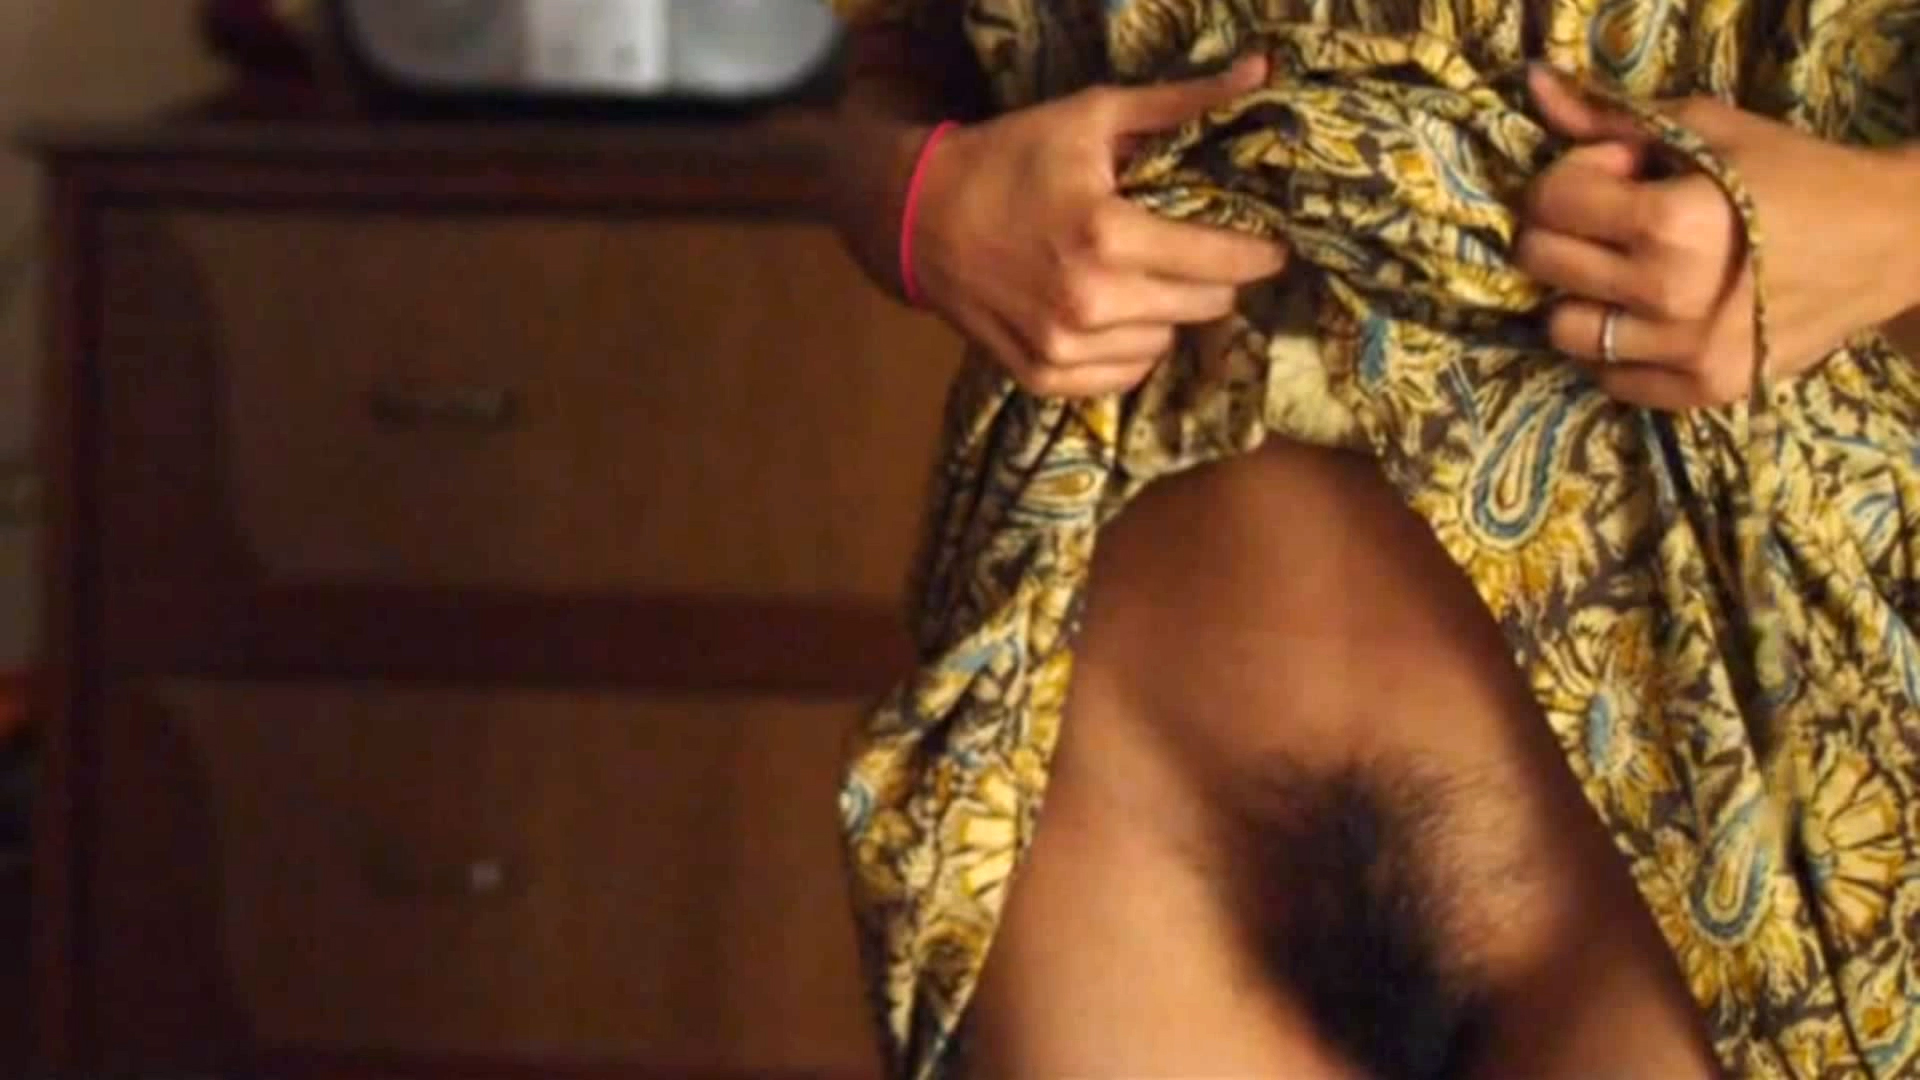 Radhika Apte (30 years) shows bush in nude scene from Madly (2016). 